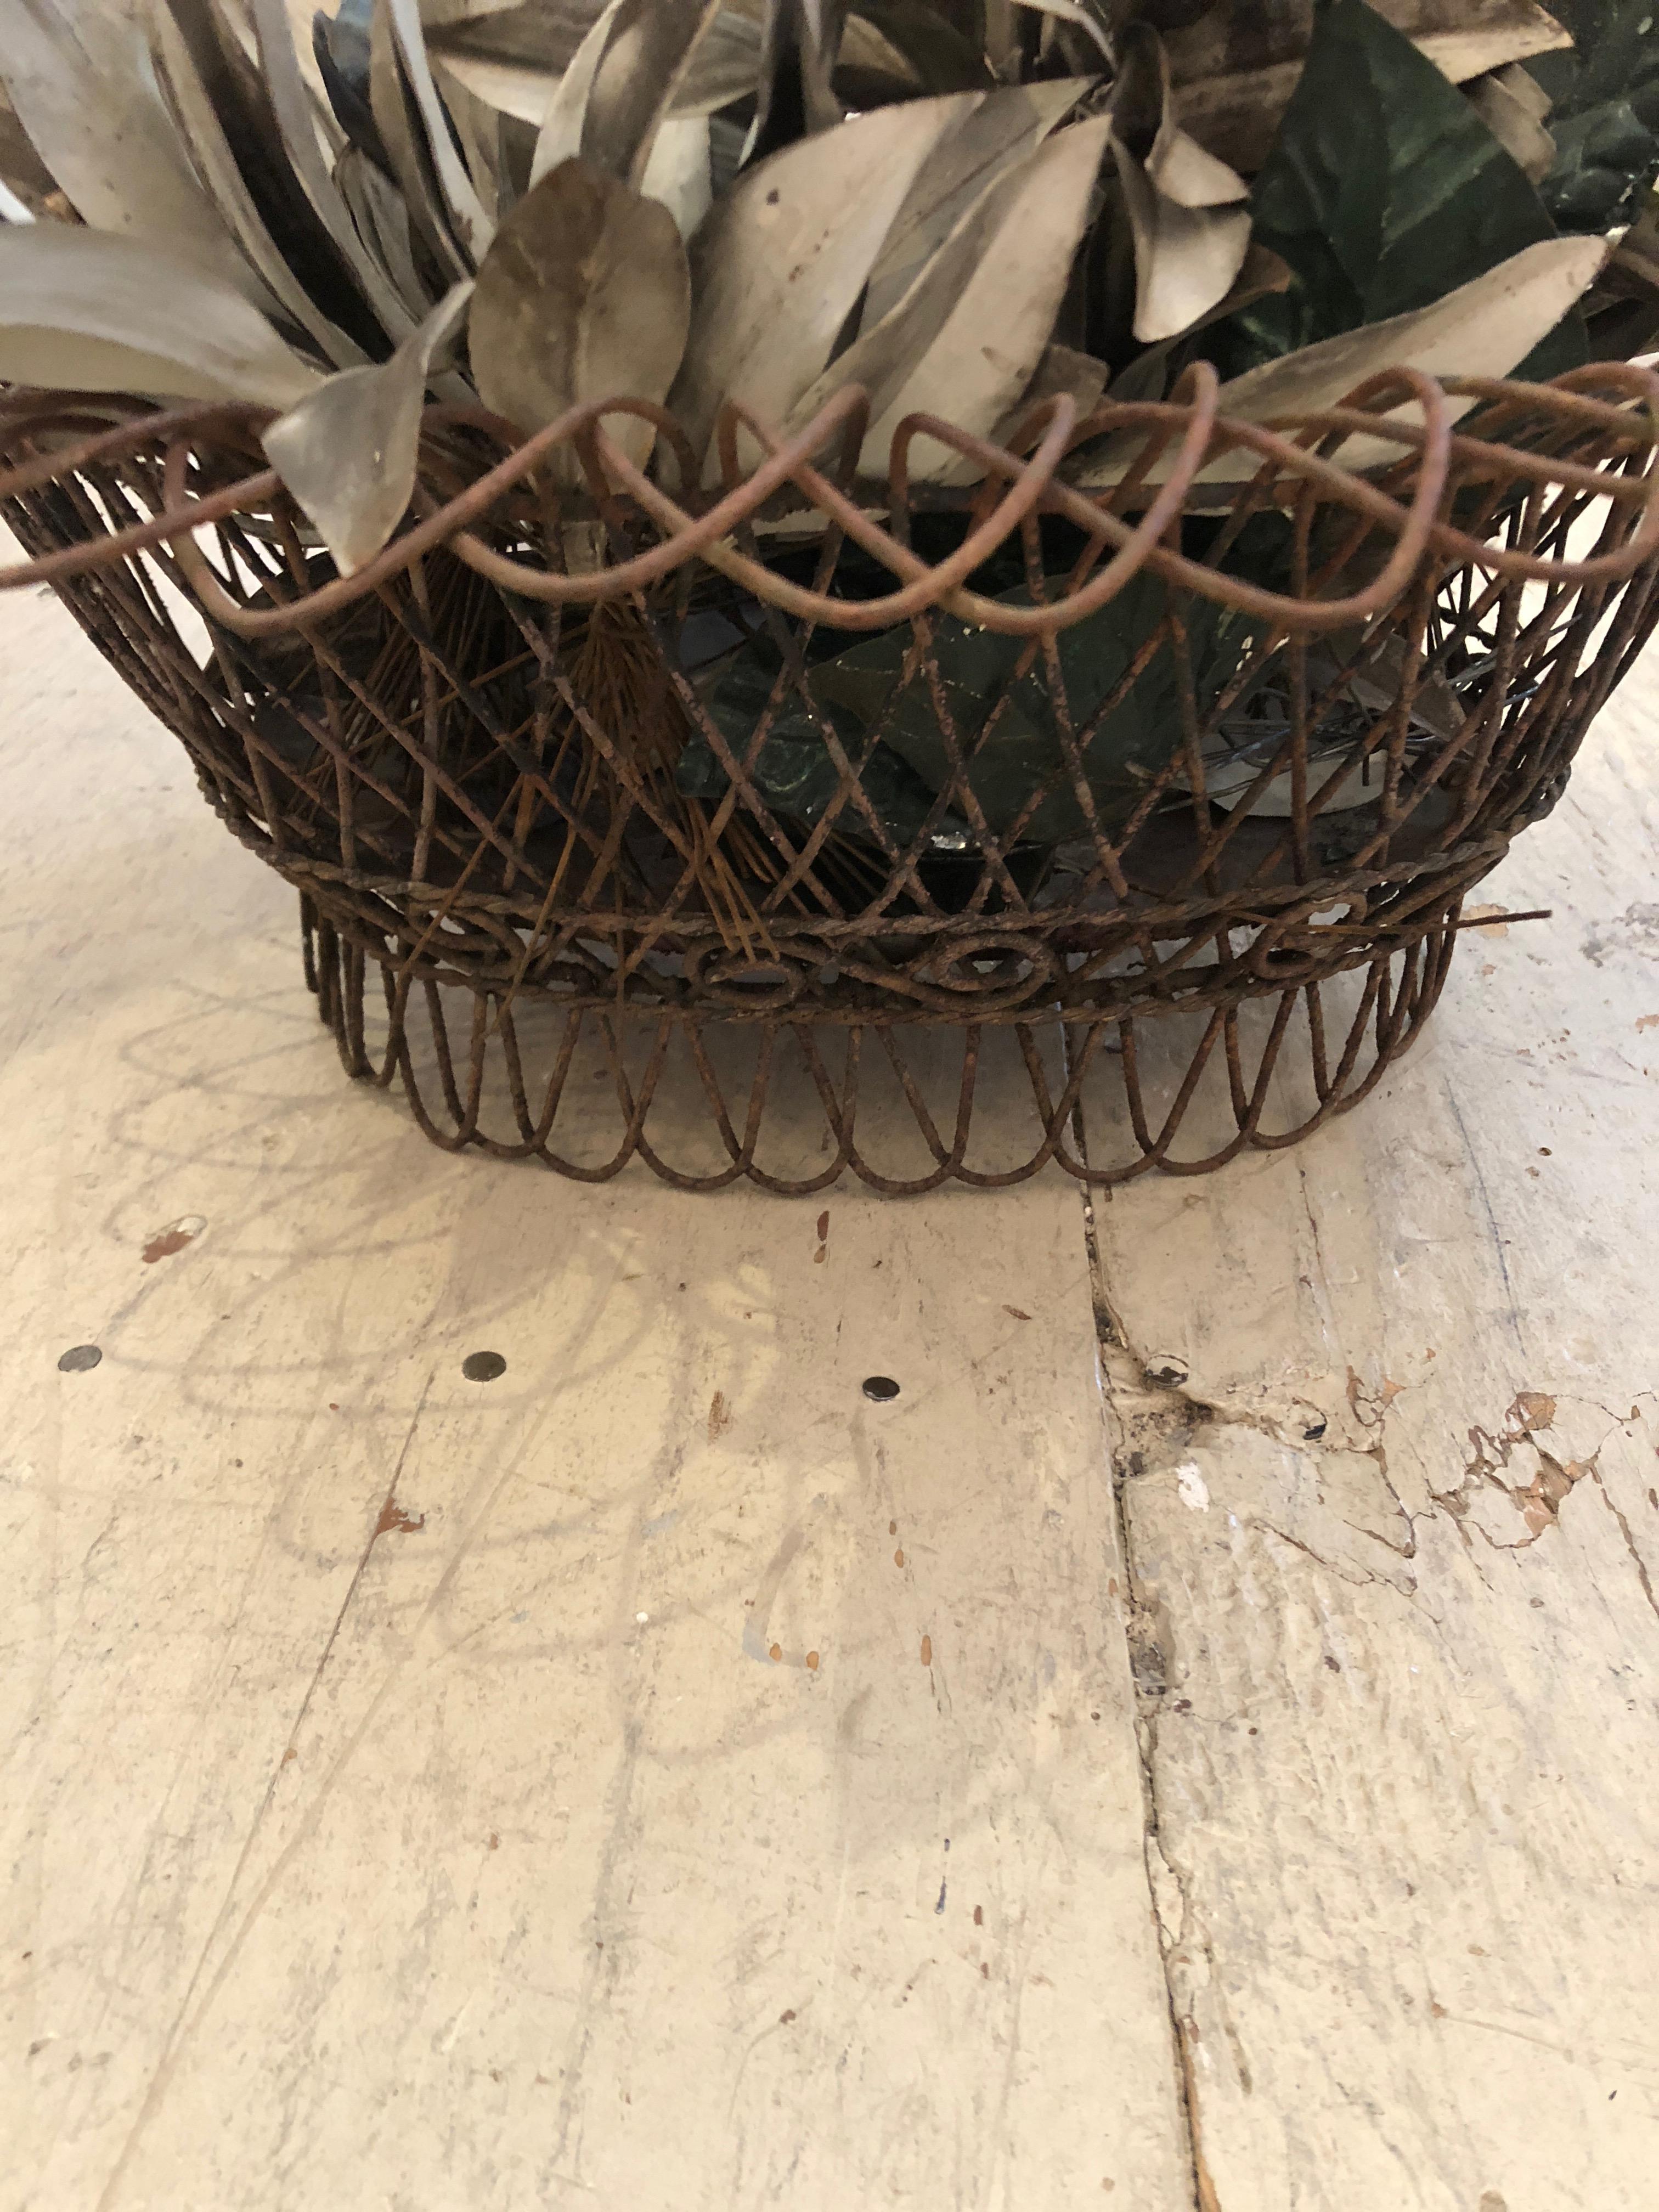 Wonderful tabletop accessory that's a 19th century wire and metal basket planter, filled with tole leaves in a gunmetal grey.